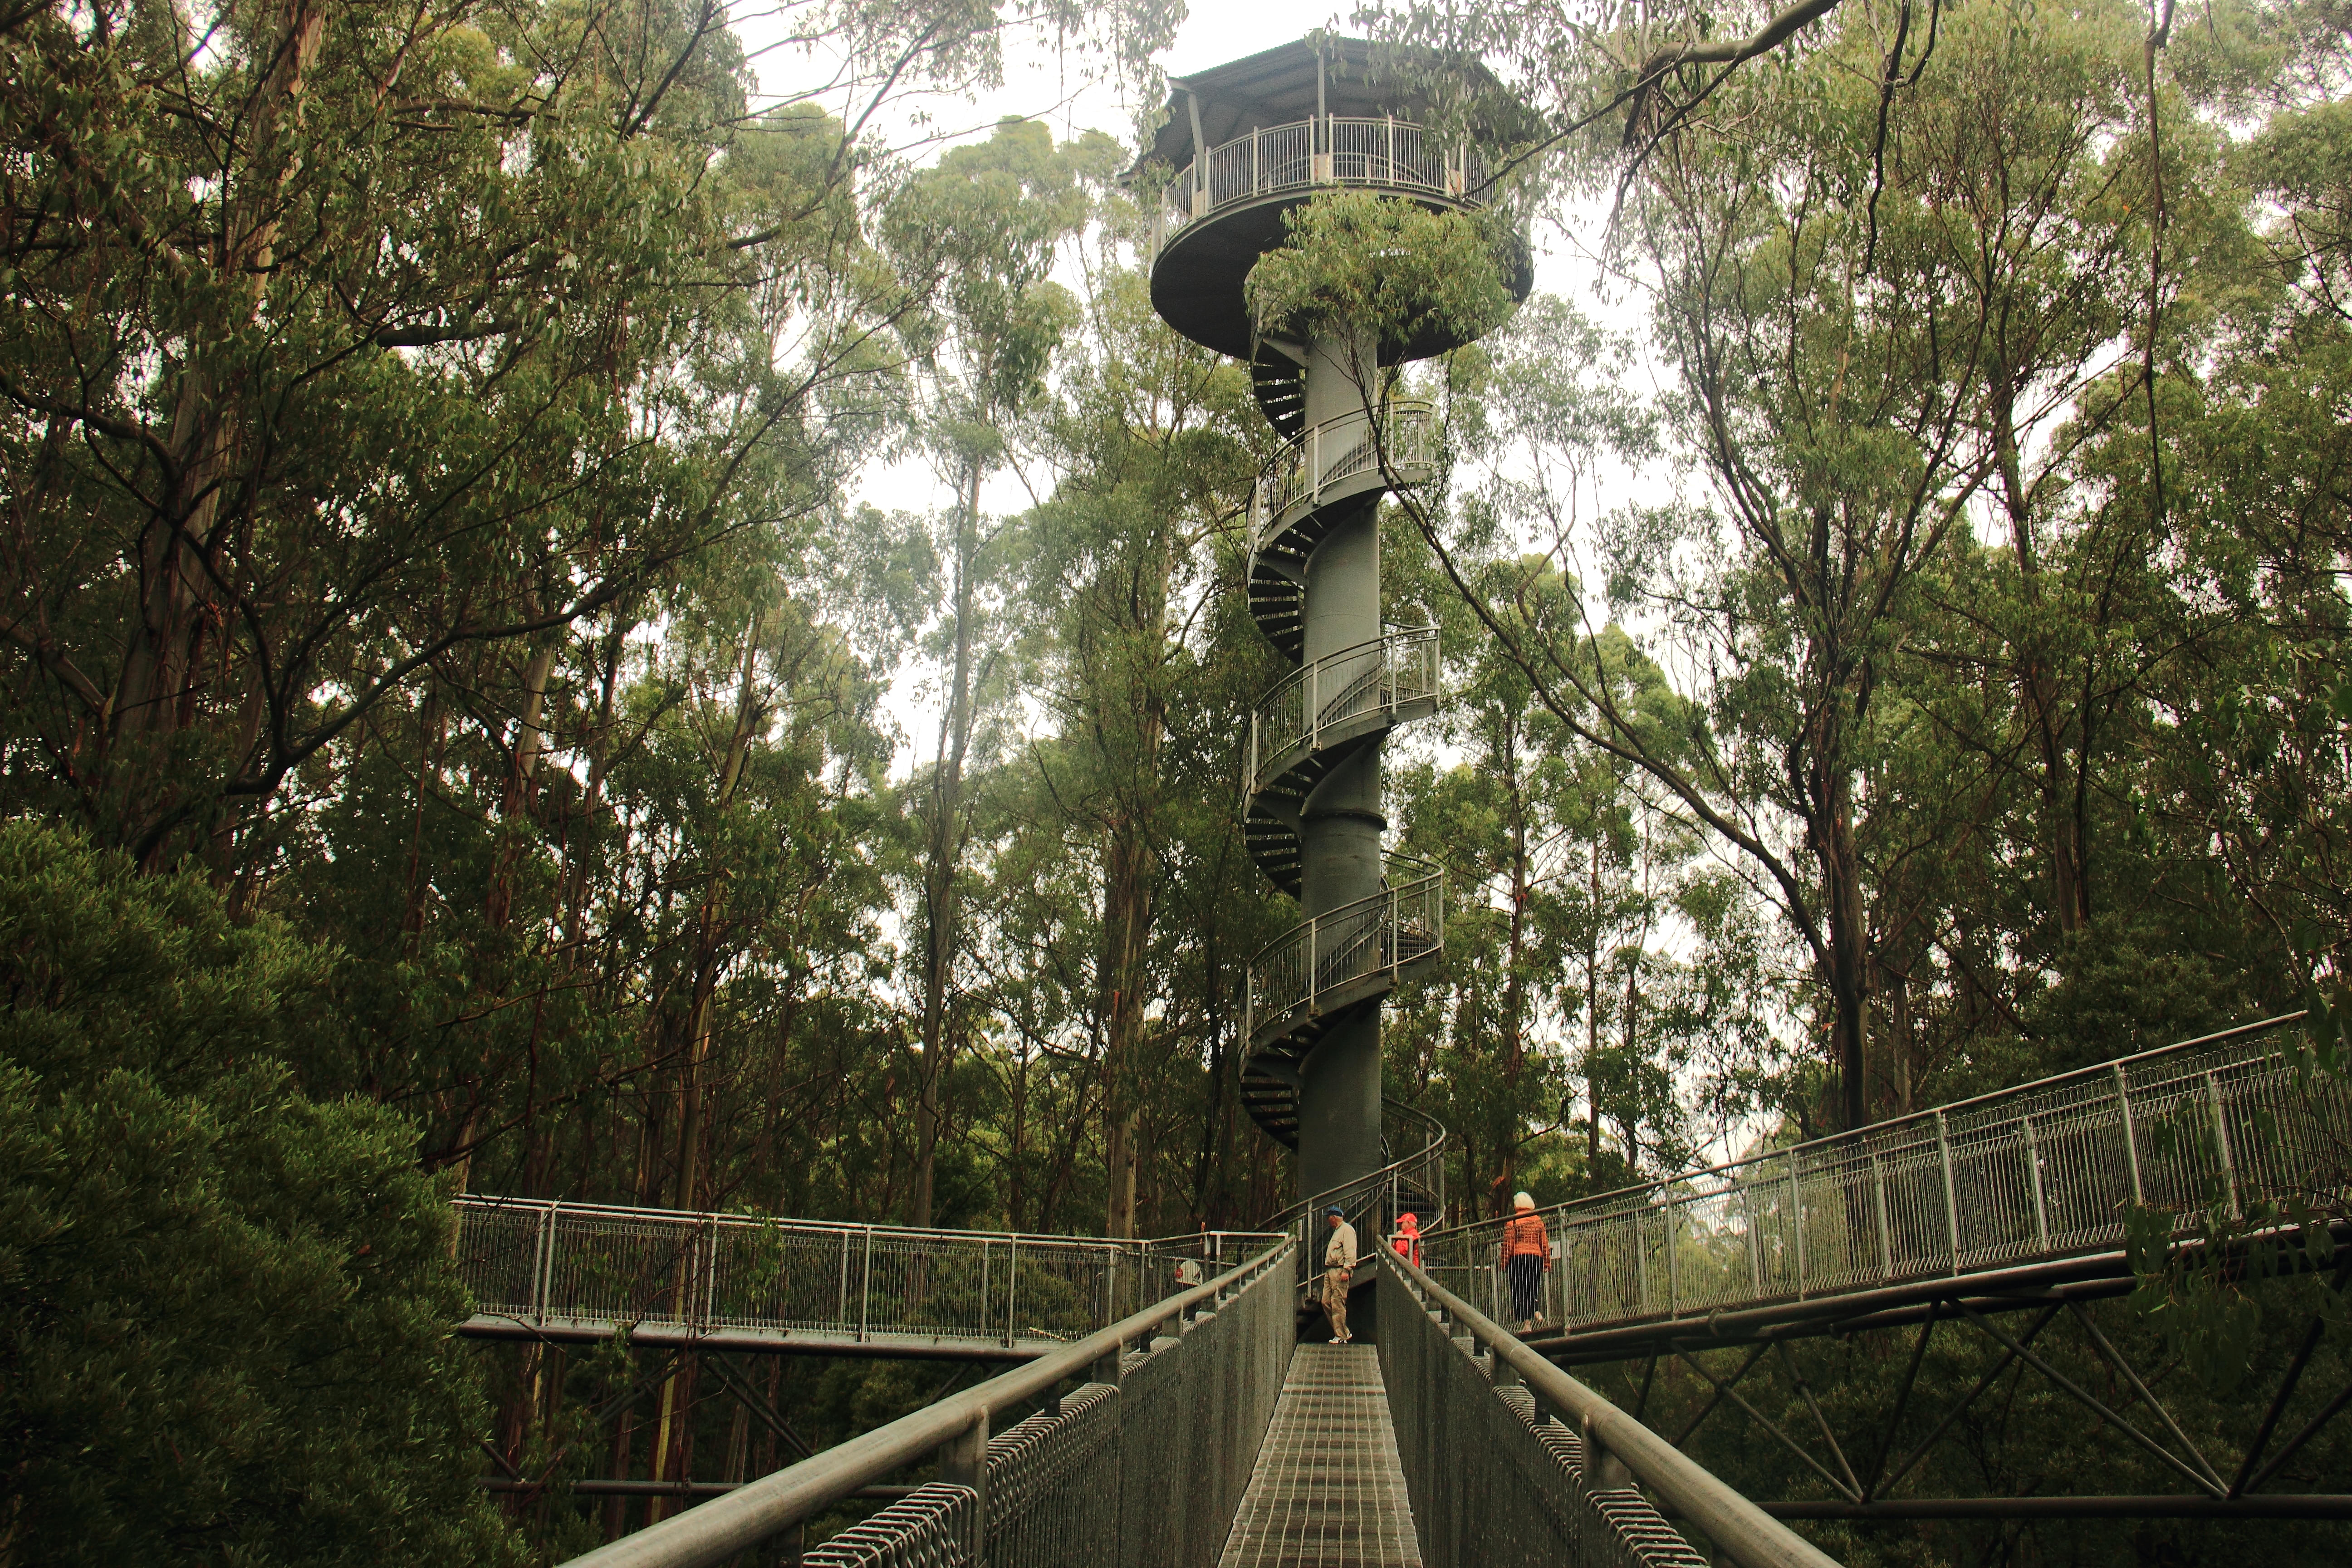 Climb up the 45m Spiral Tower to witness the best views of the rainforest